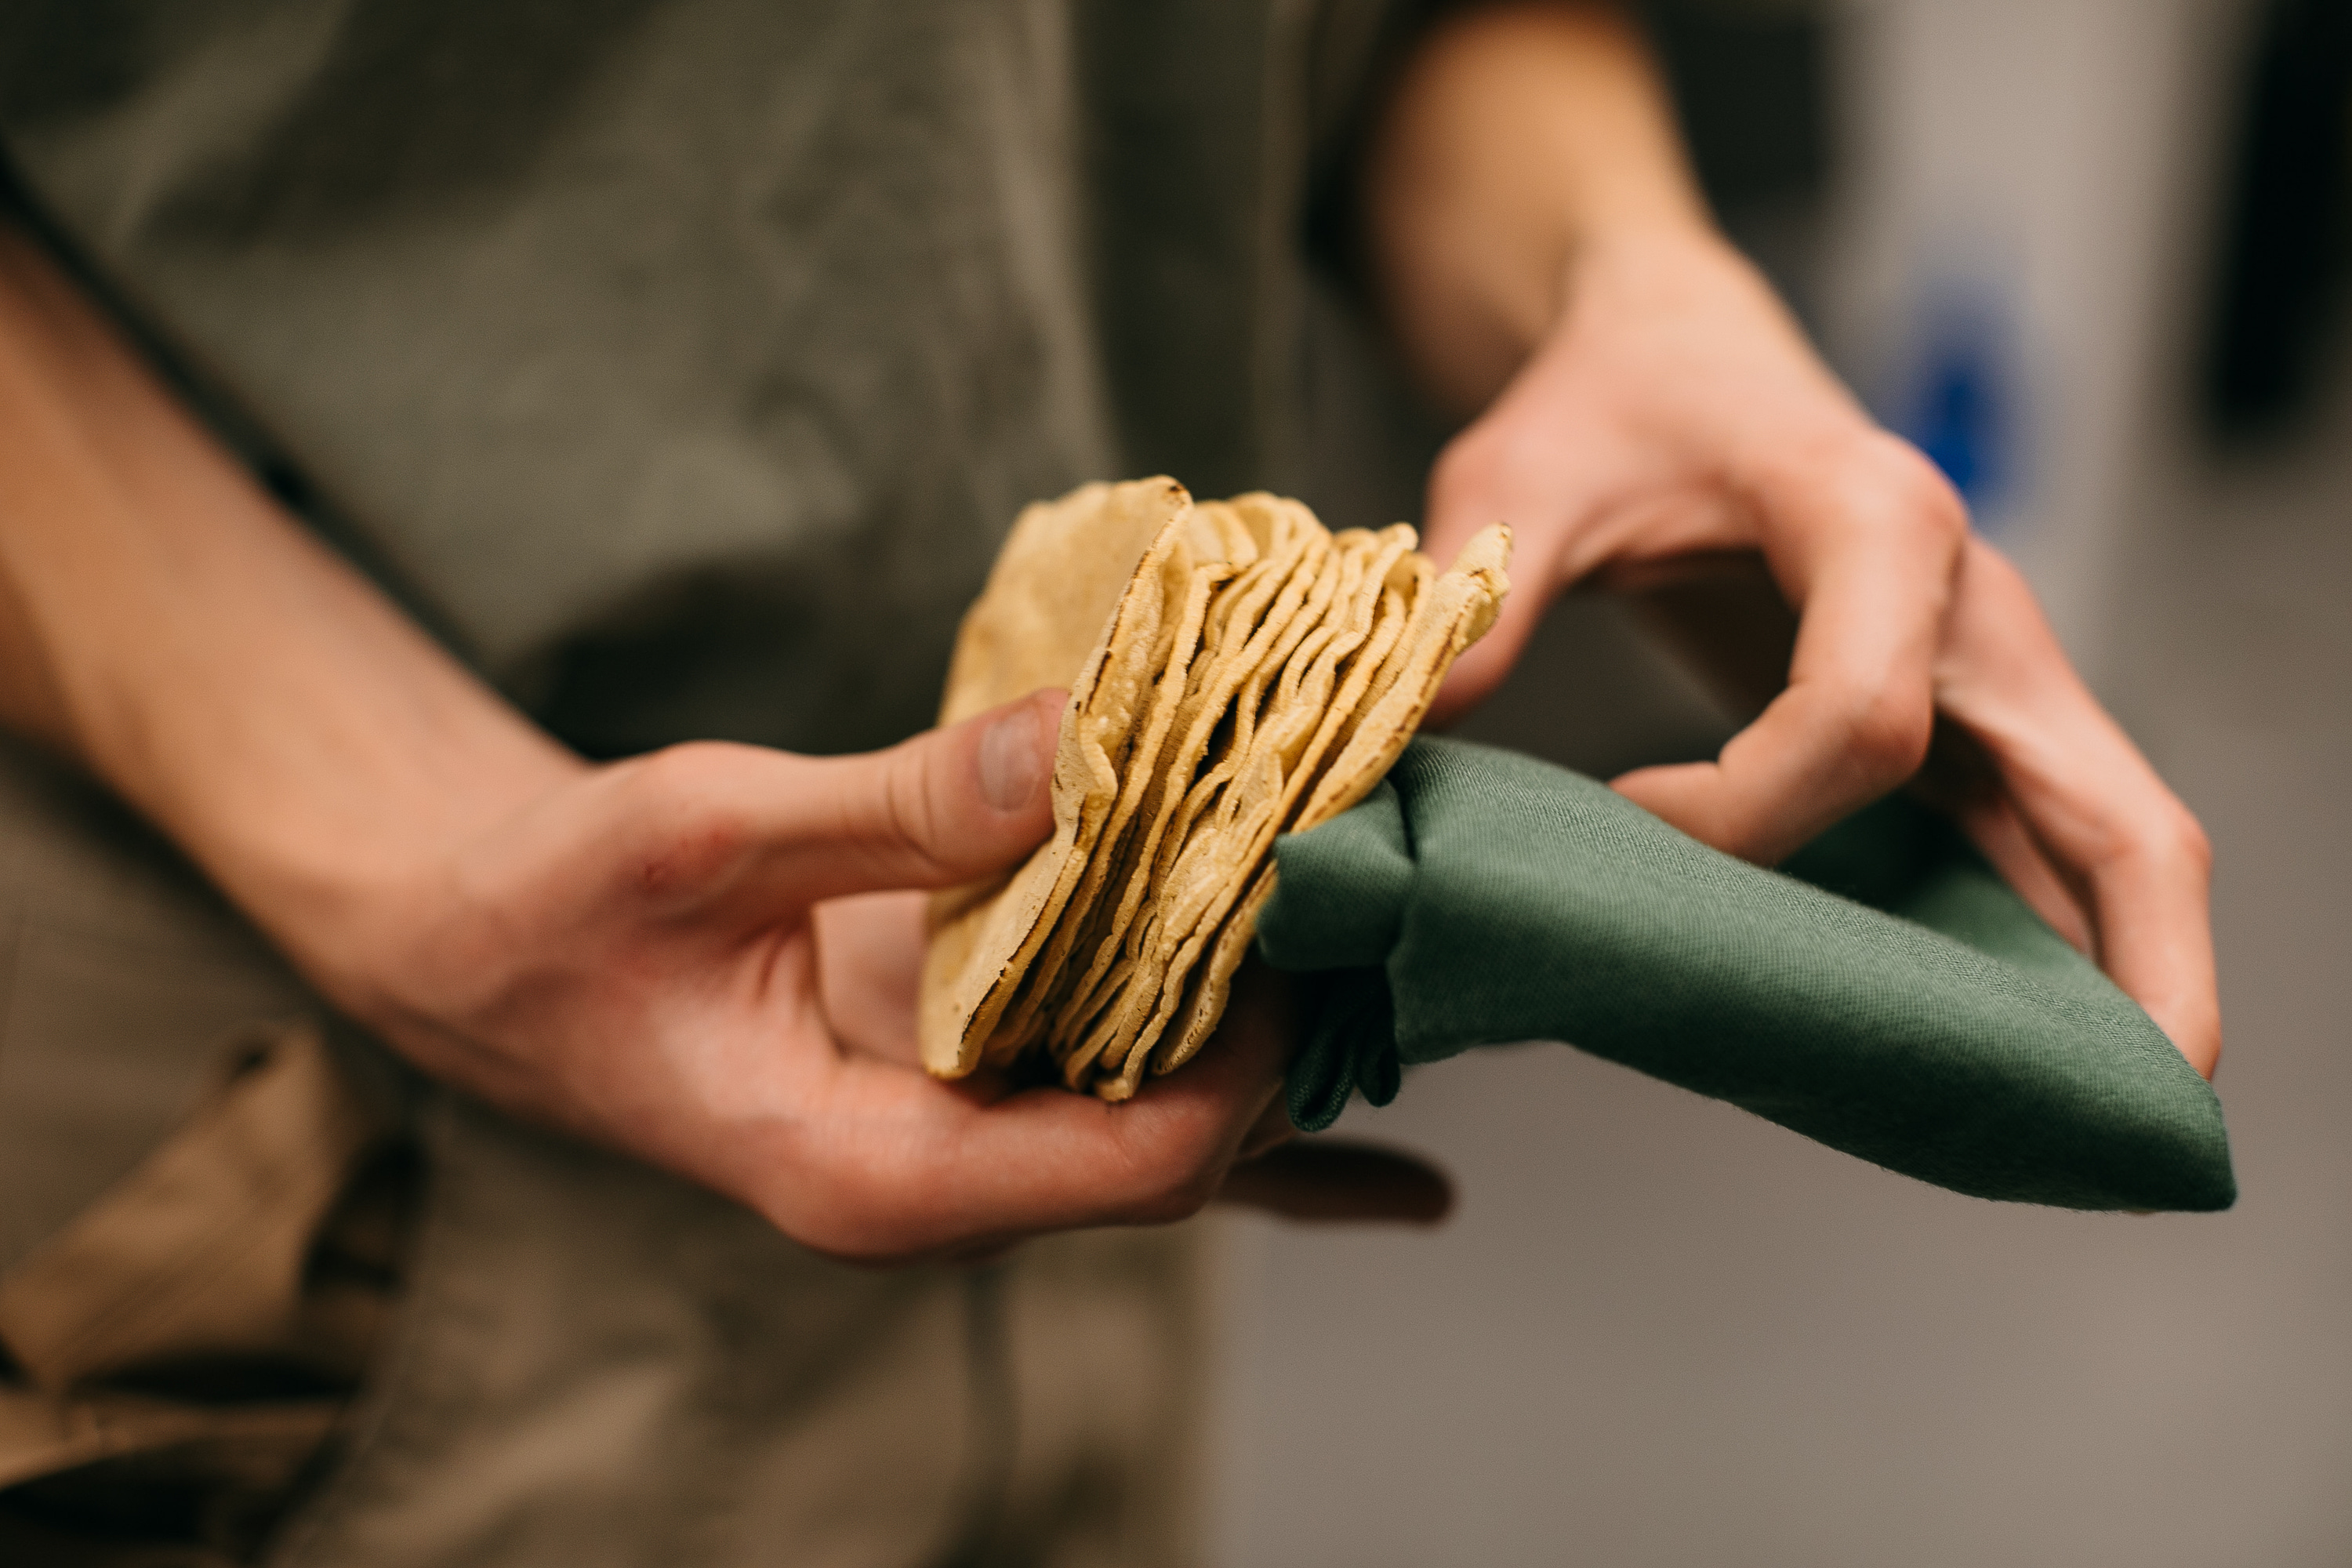 A hand holds a green cloth and a stack of tortillas